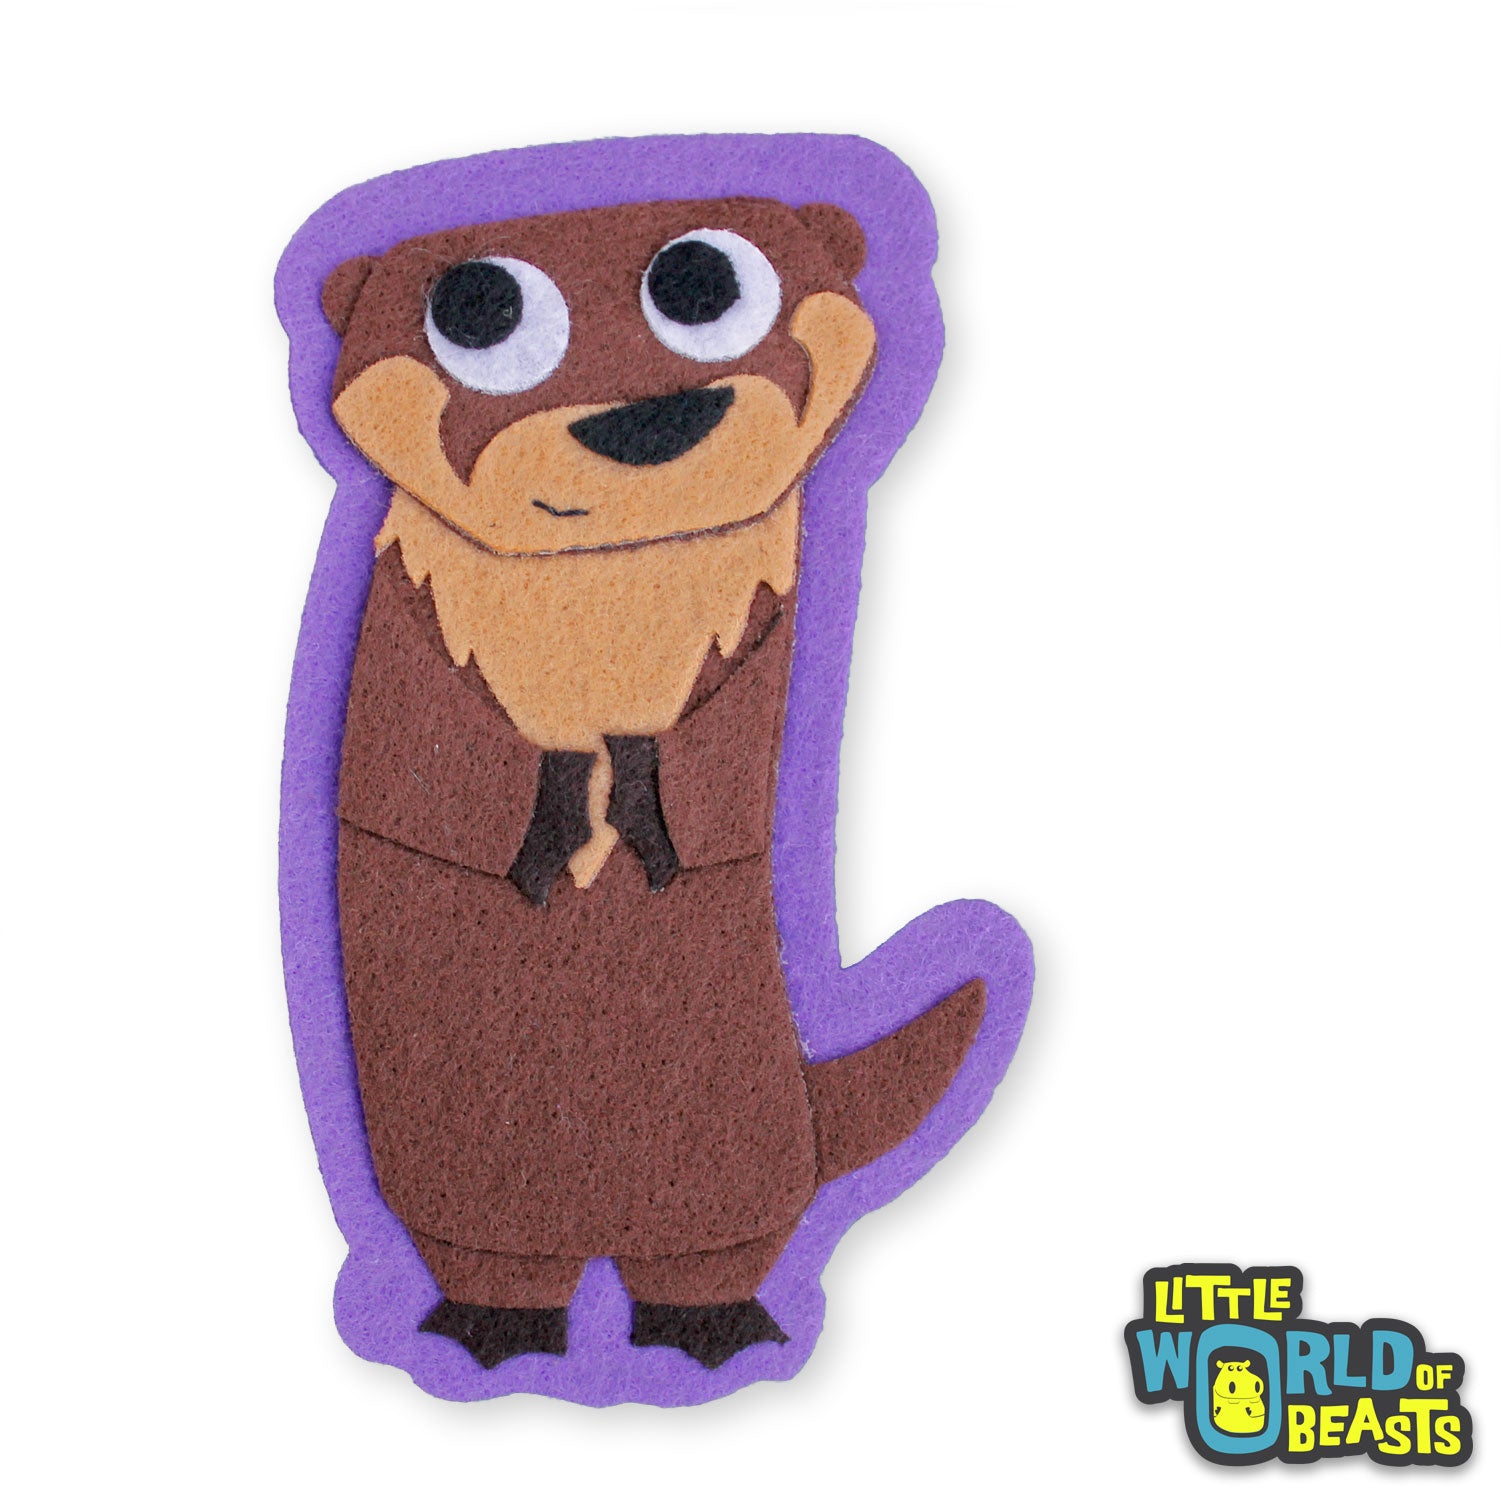 Bastain the River Otter - Felt Animal Applique Patch - Little World of Beasts